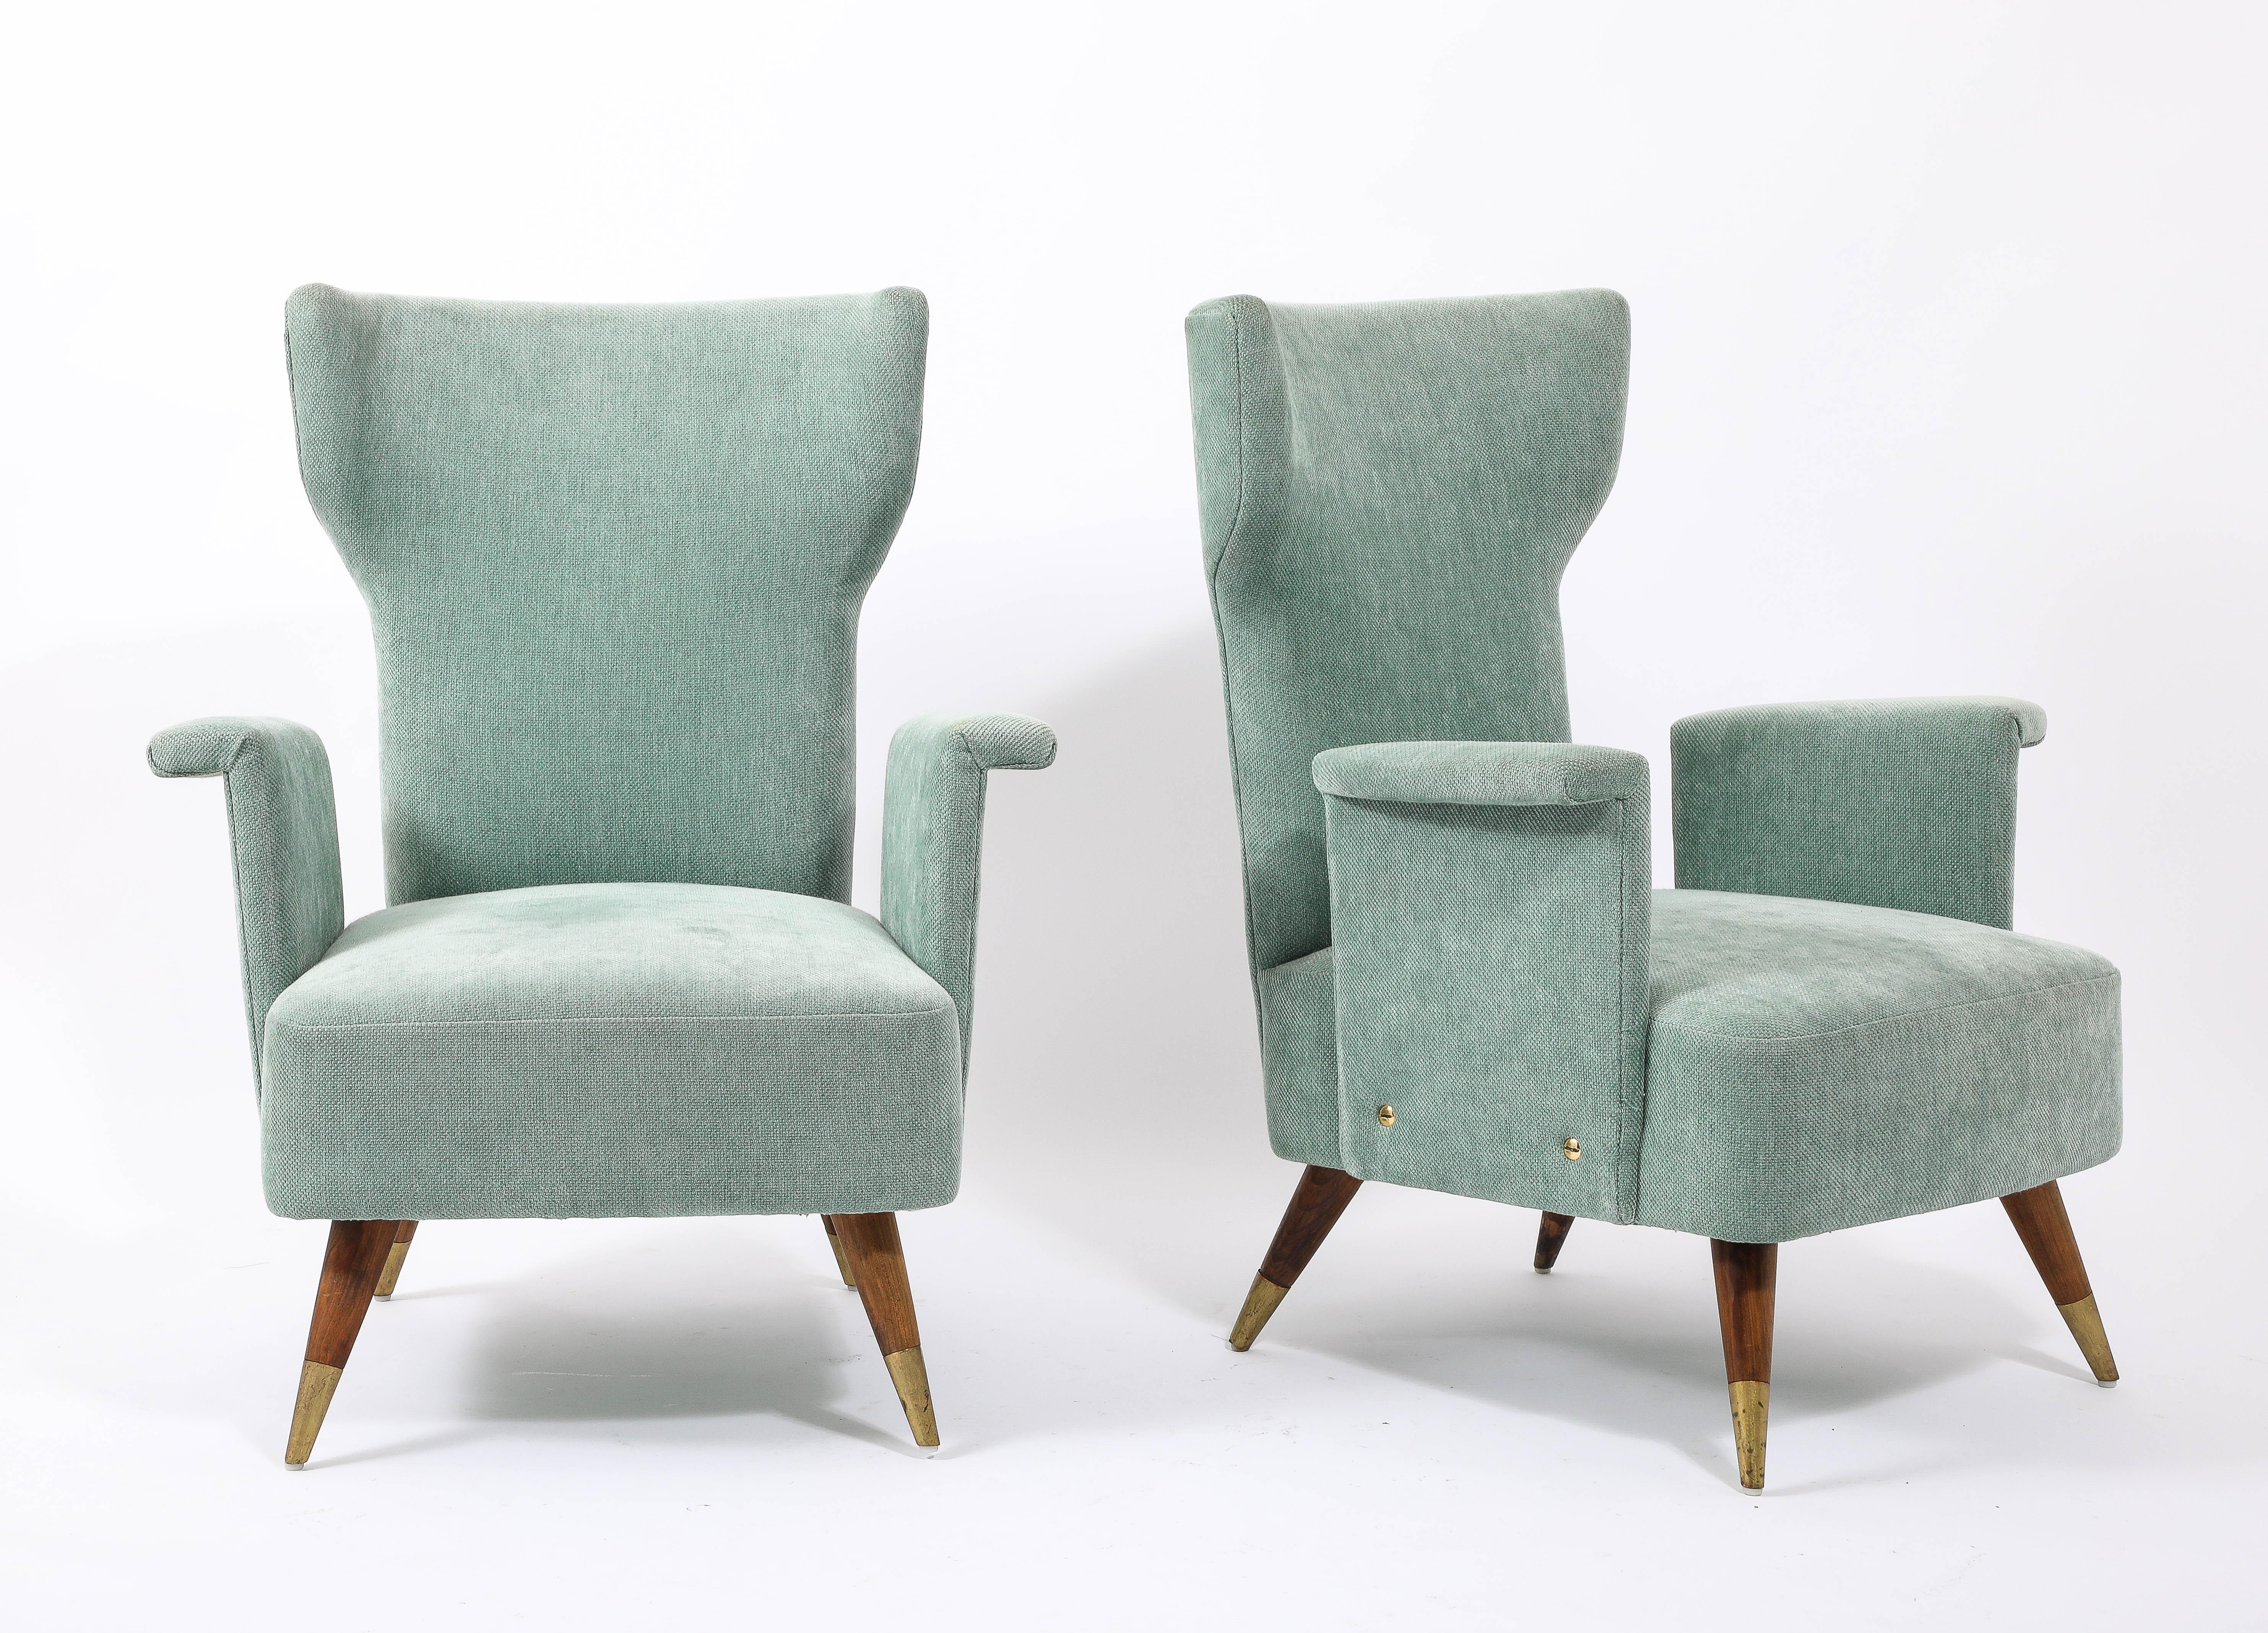 Pale Blue Tall Italian Wingchairs, Italy 1950's For Sale 1